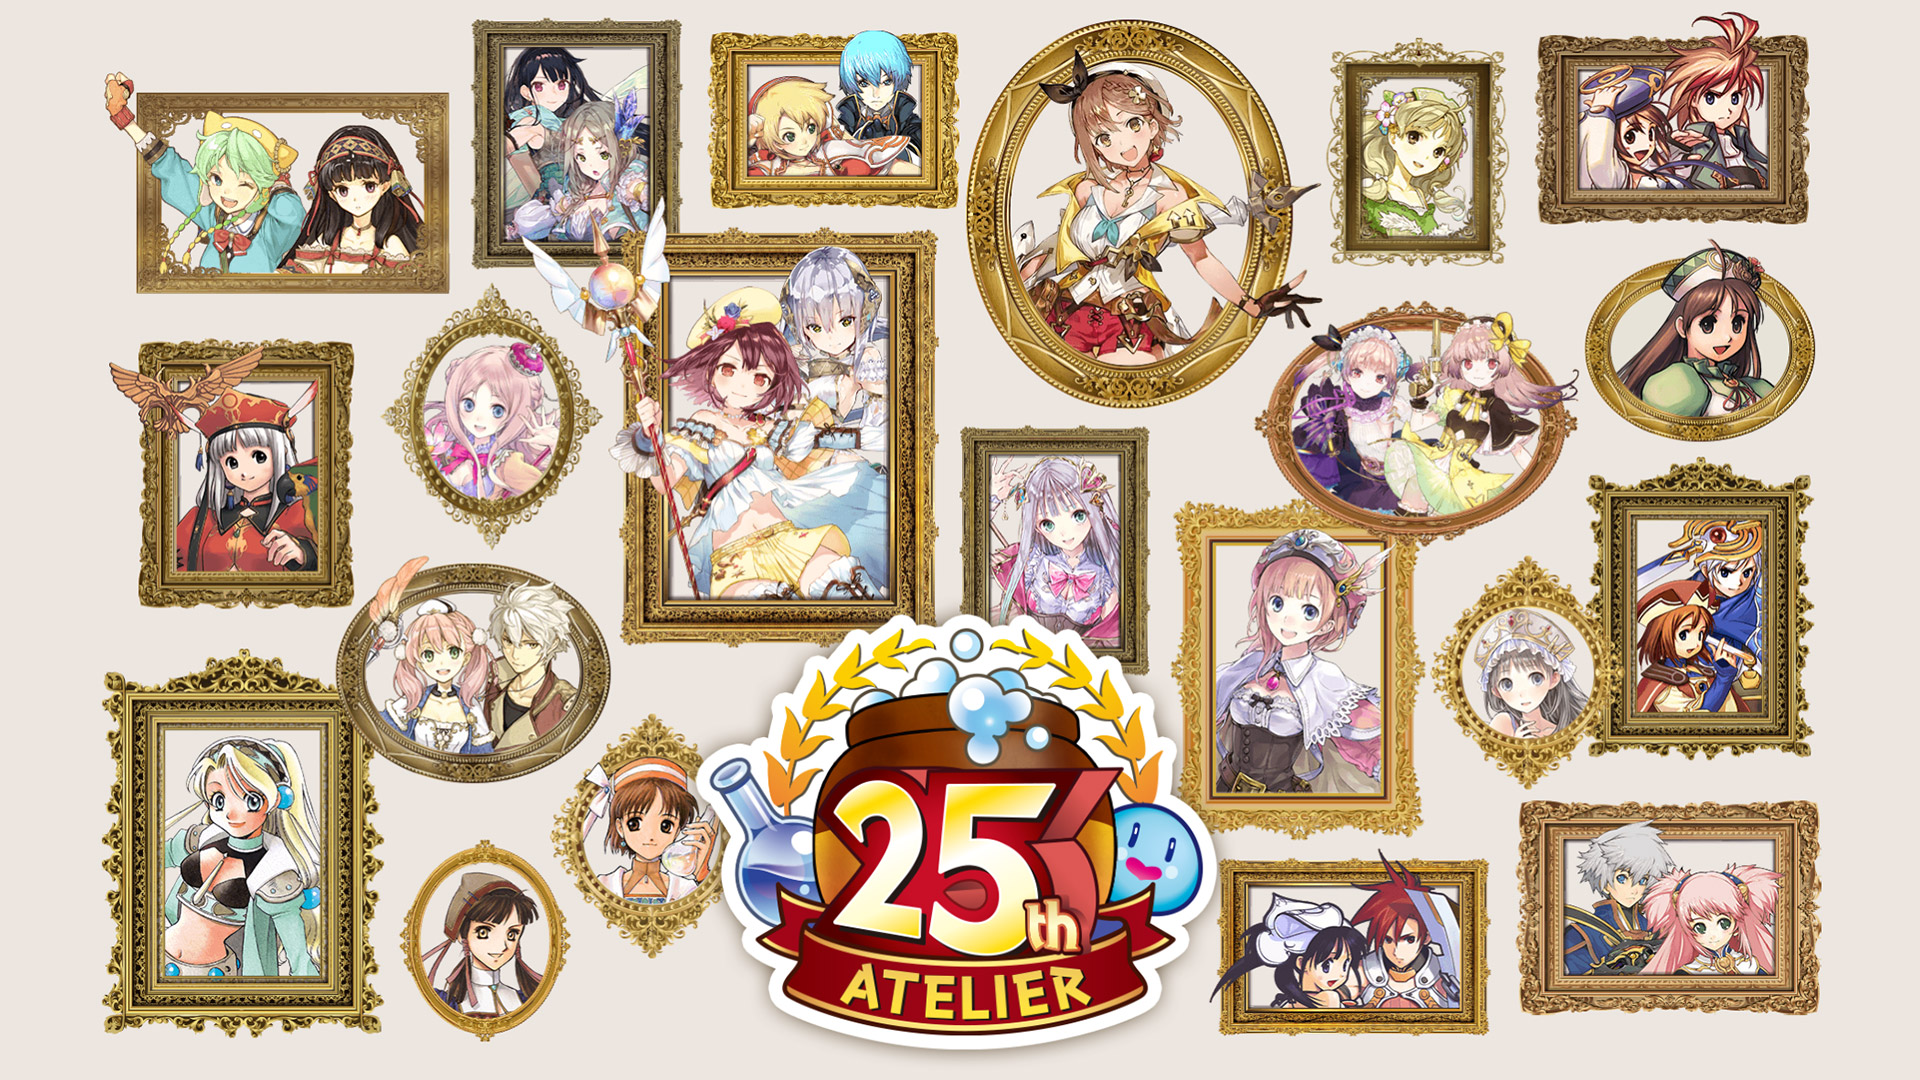 Atelier 25th Anniversary screenshot from the trailer